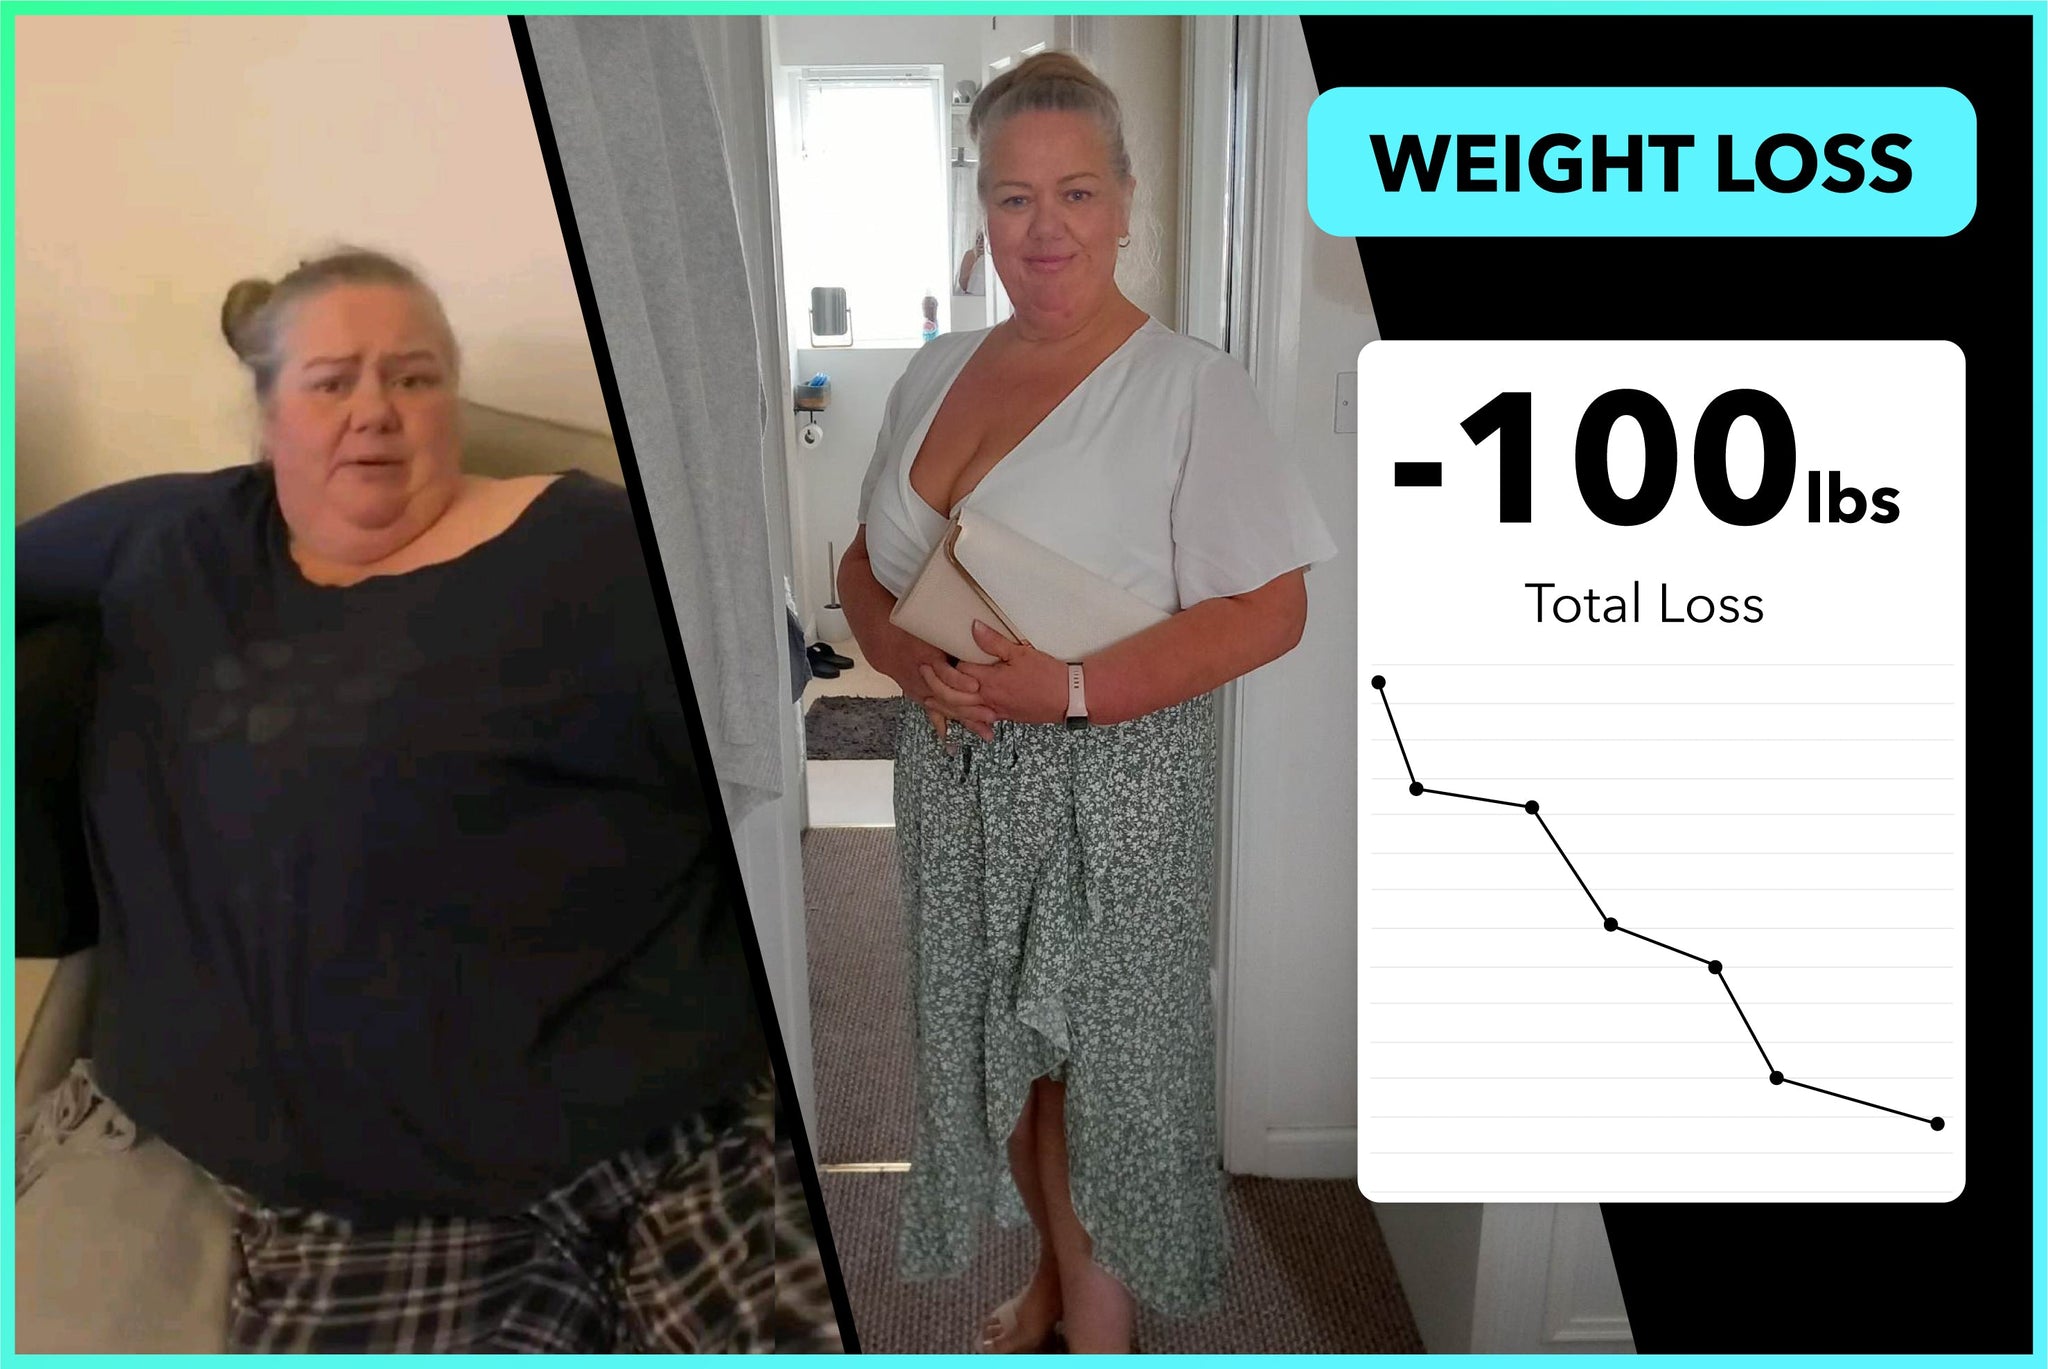 Here is how Allison lost 100lbs in 10 months with Team RH